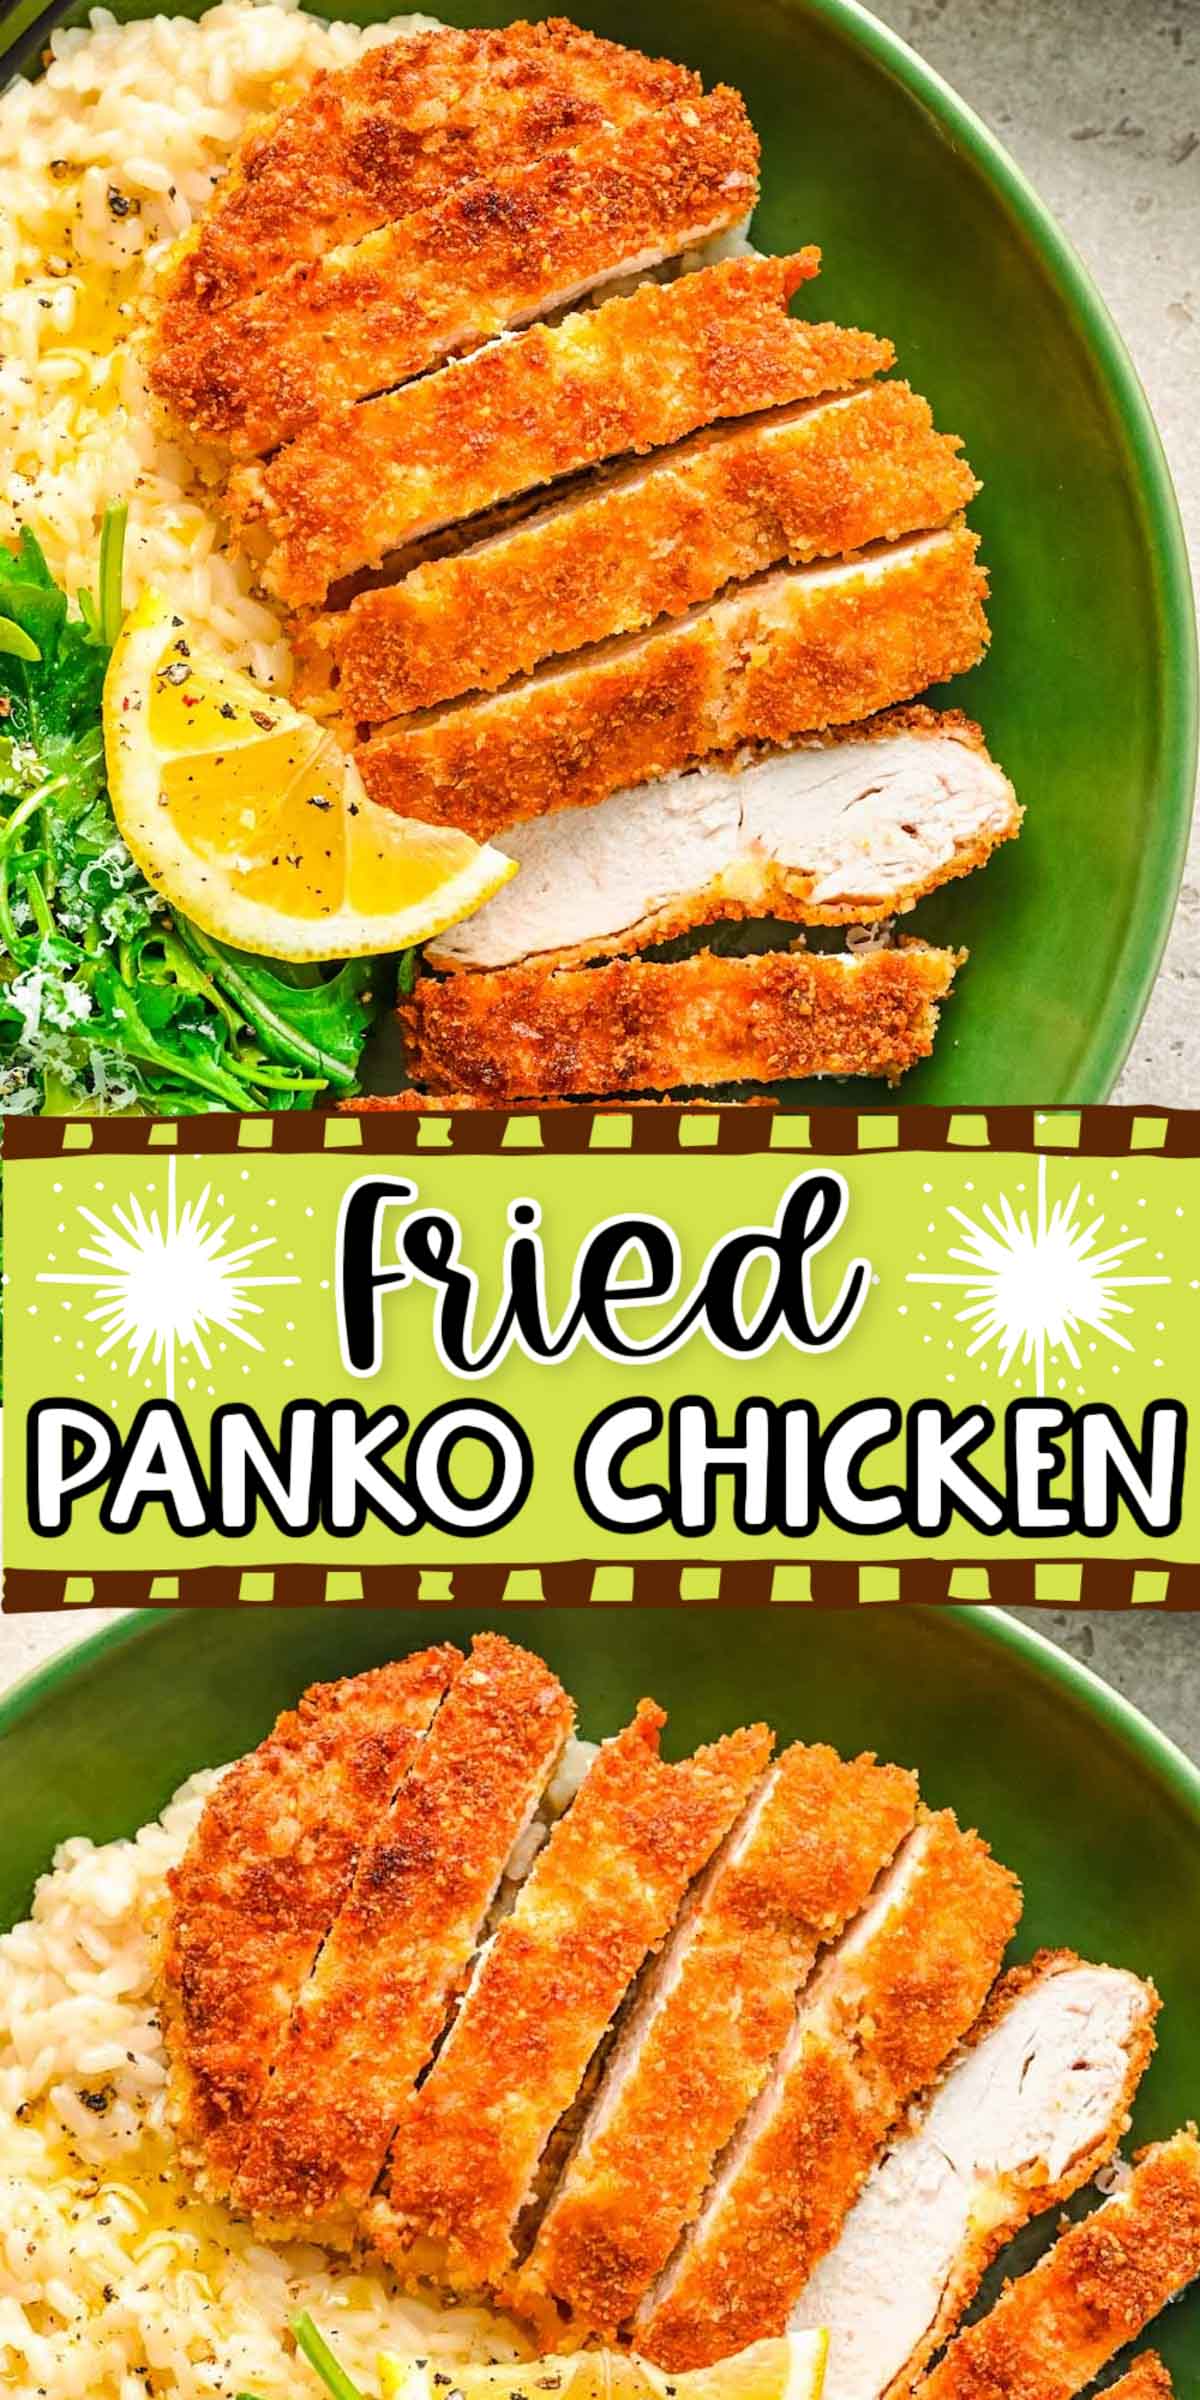 This Fried Panko Chicken Recipe checks all the boxes with moist meat, mouthwatering flavor, and delicious crispy, crunchy texture! The icing on the cake is that it's ready in just 30 minutes! via @sugarandsoulco